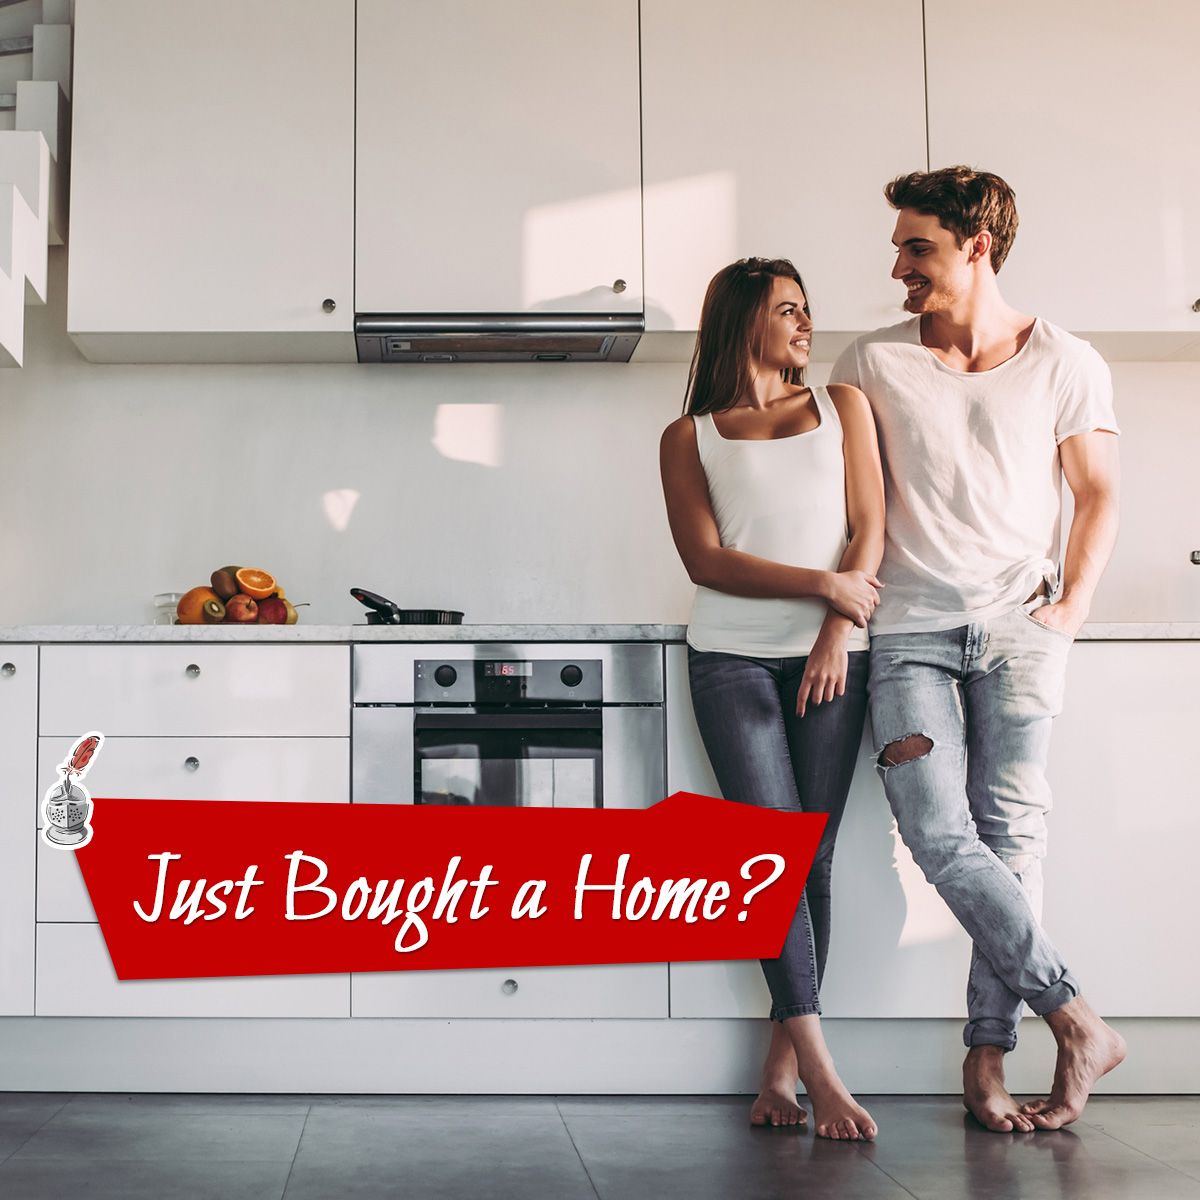 Just Bought a Home?